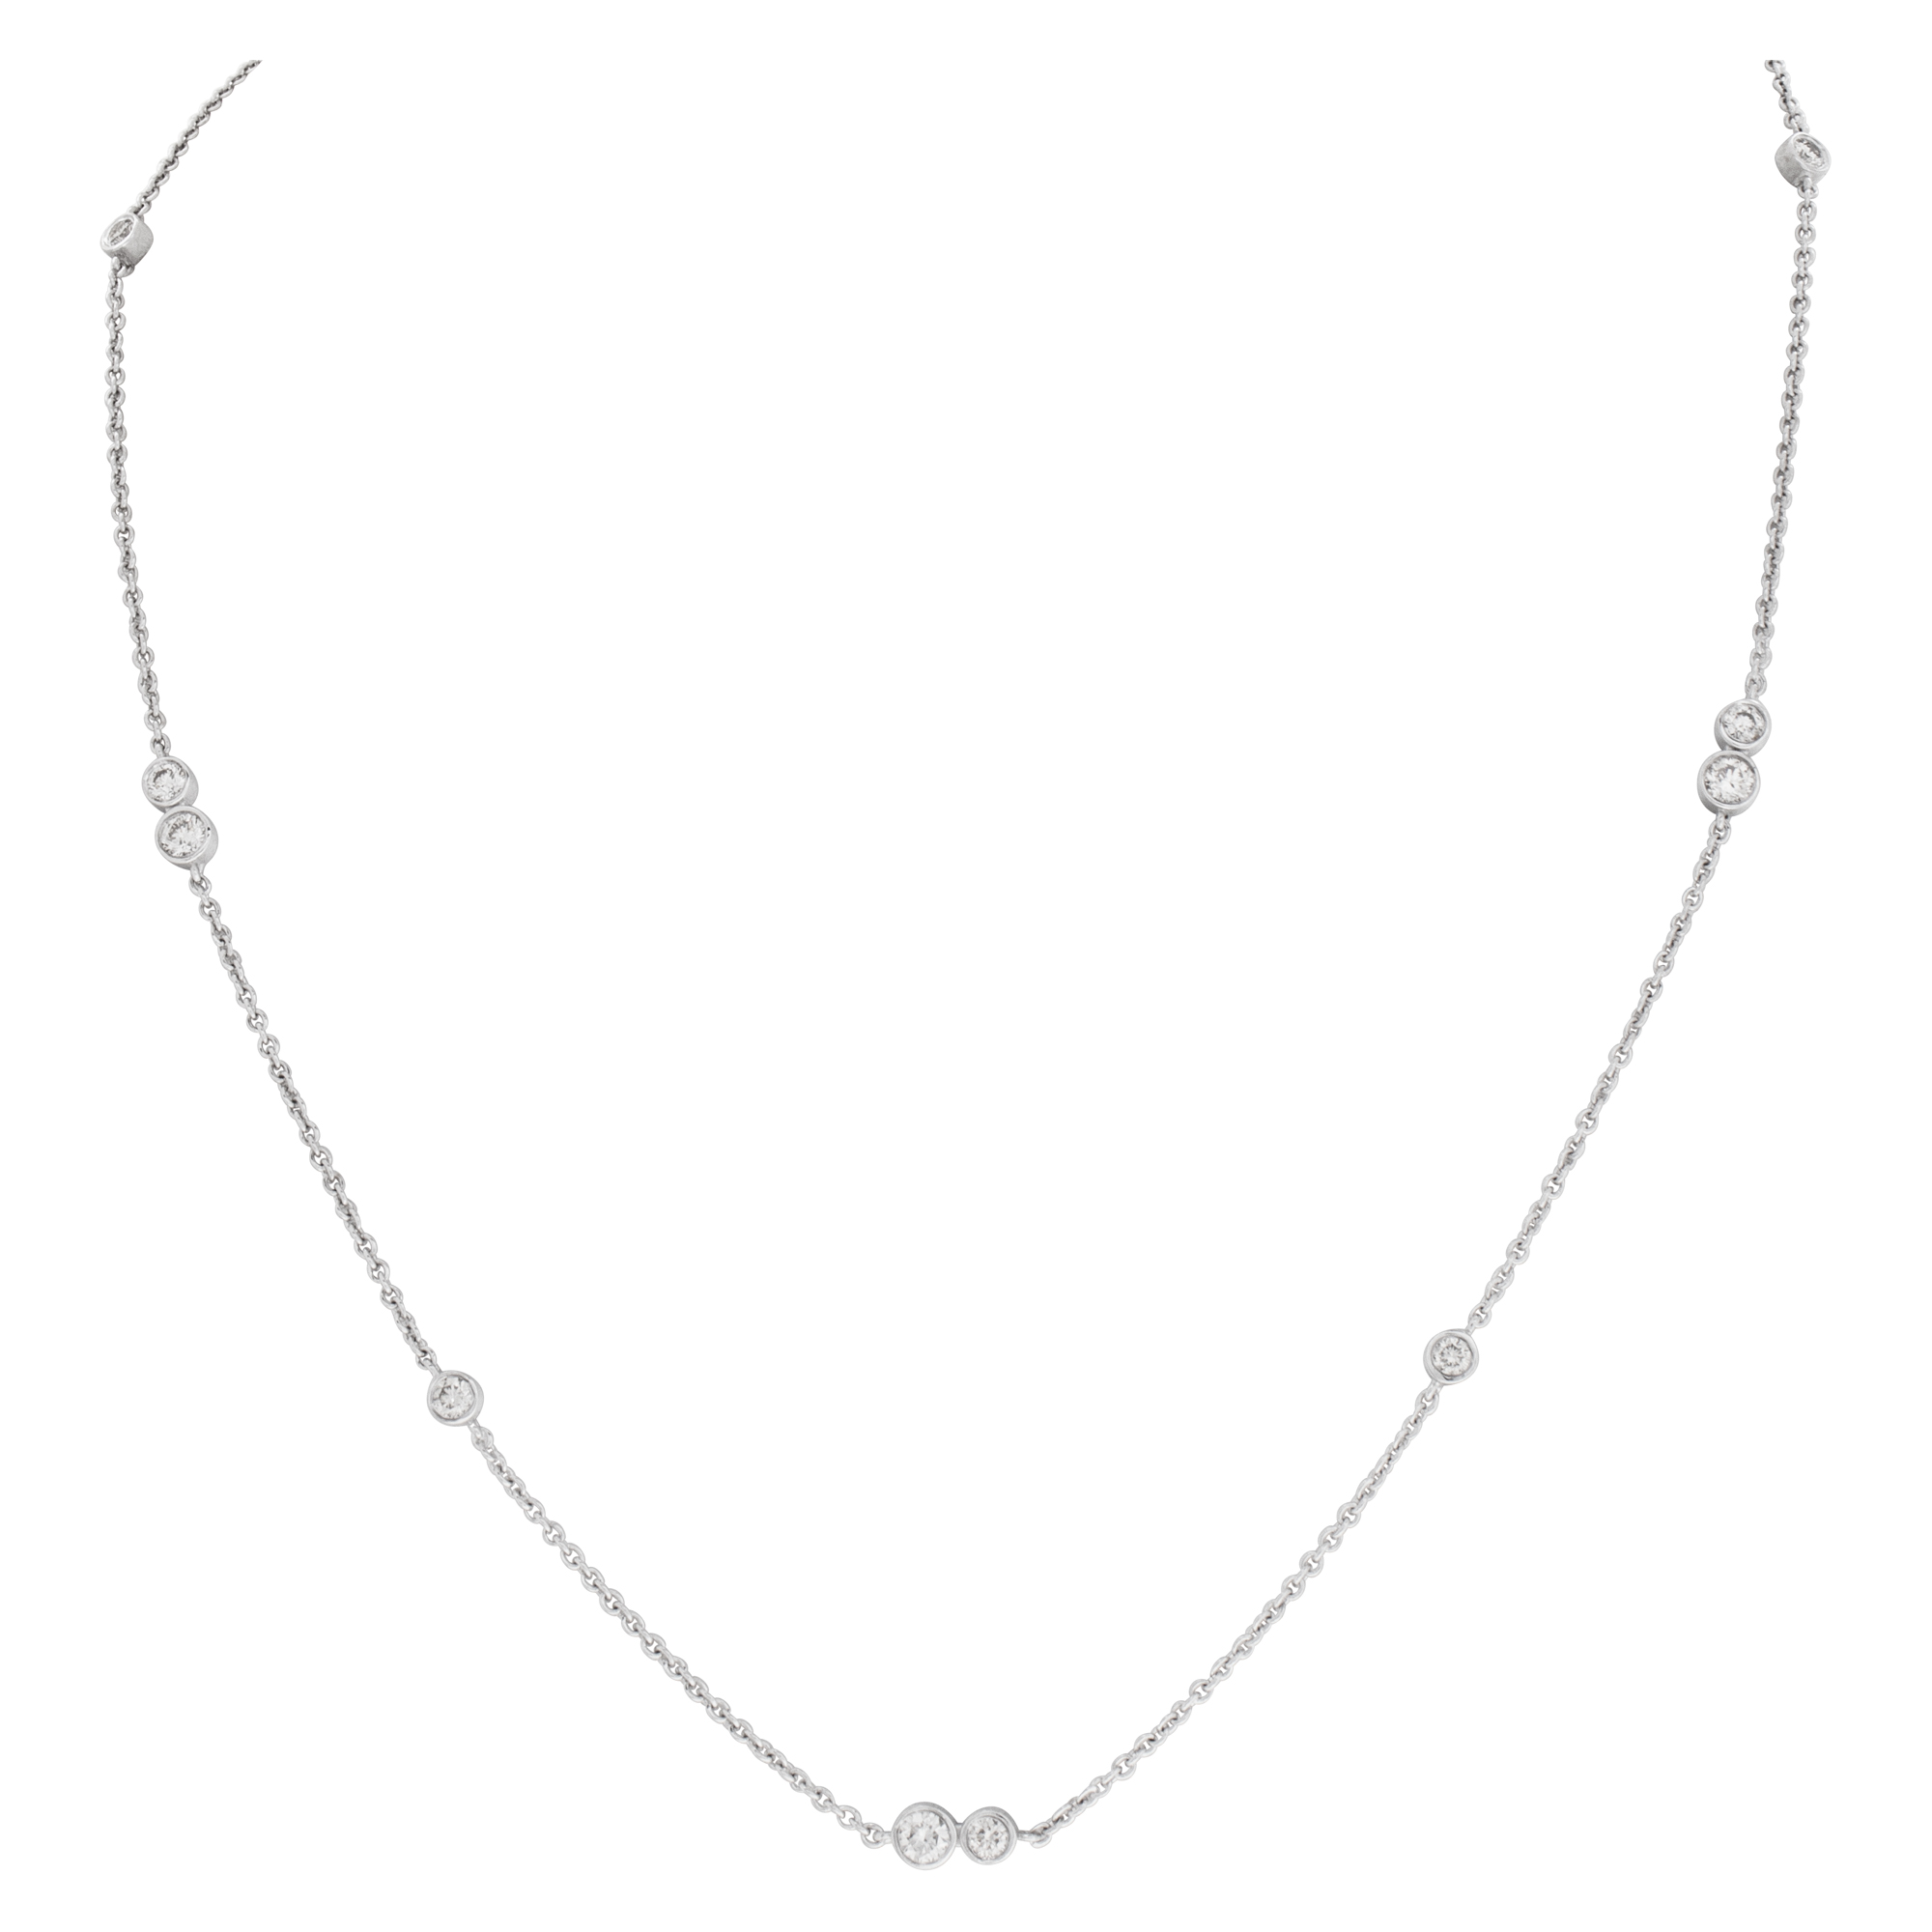 "Diamonds by the Yard" 18 inches chain with approx 1 carat total weight bezeled set, full cut round brilliant diamonds set in 18k white gold image 2